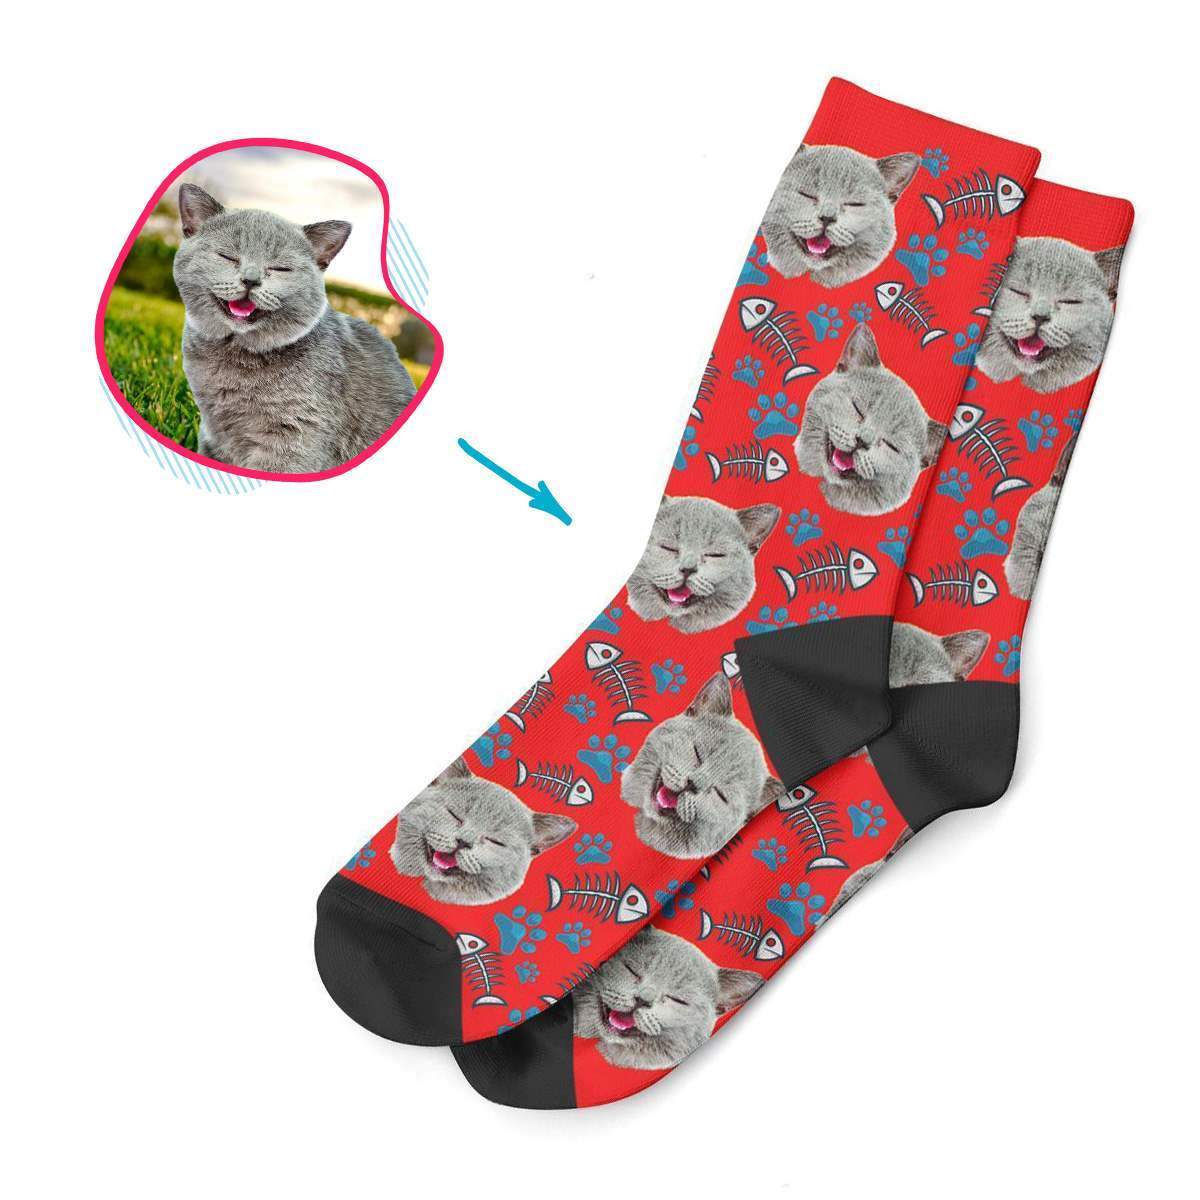 red Cat socks personalized with photo of face printed on them